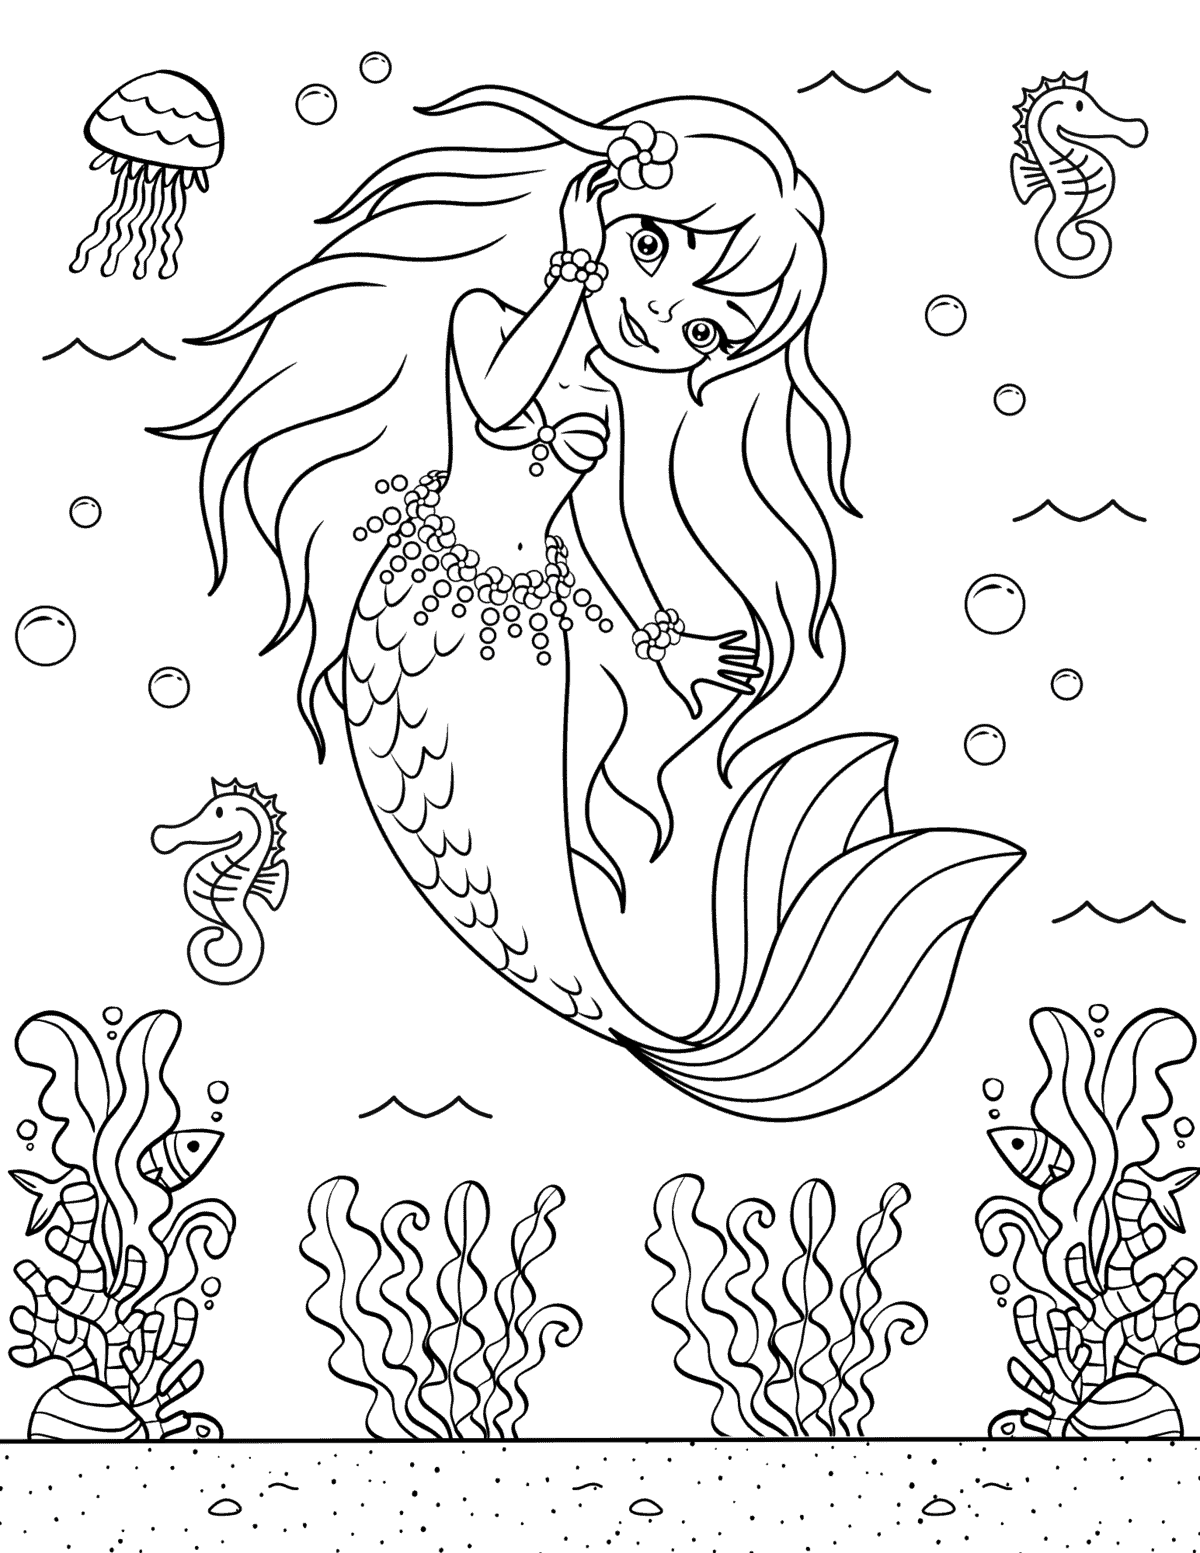 mermaid with long flowing hair swimming in the ocean coloring page